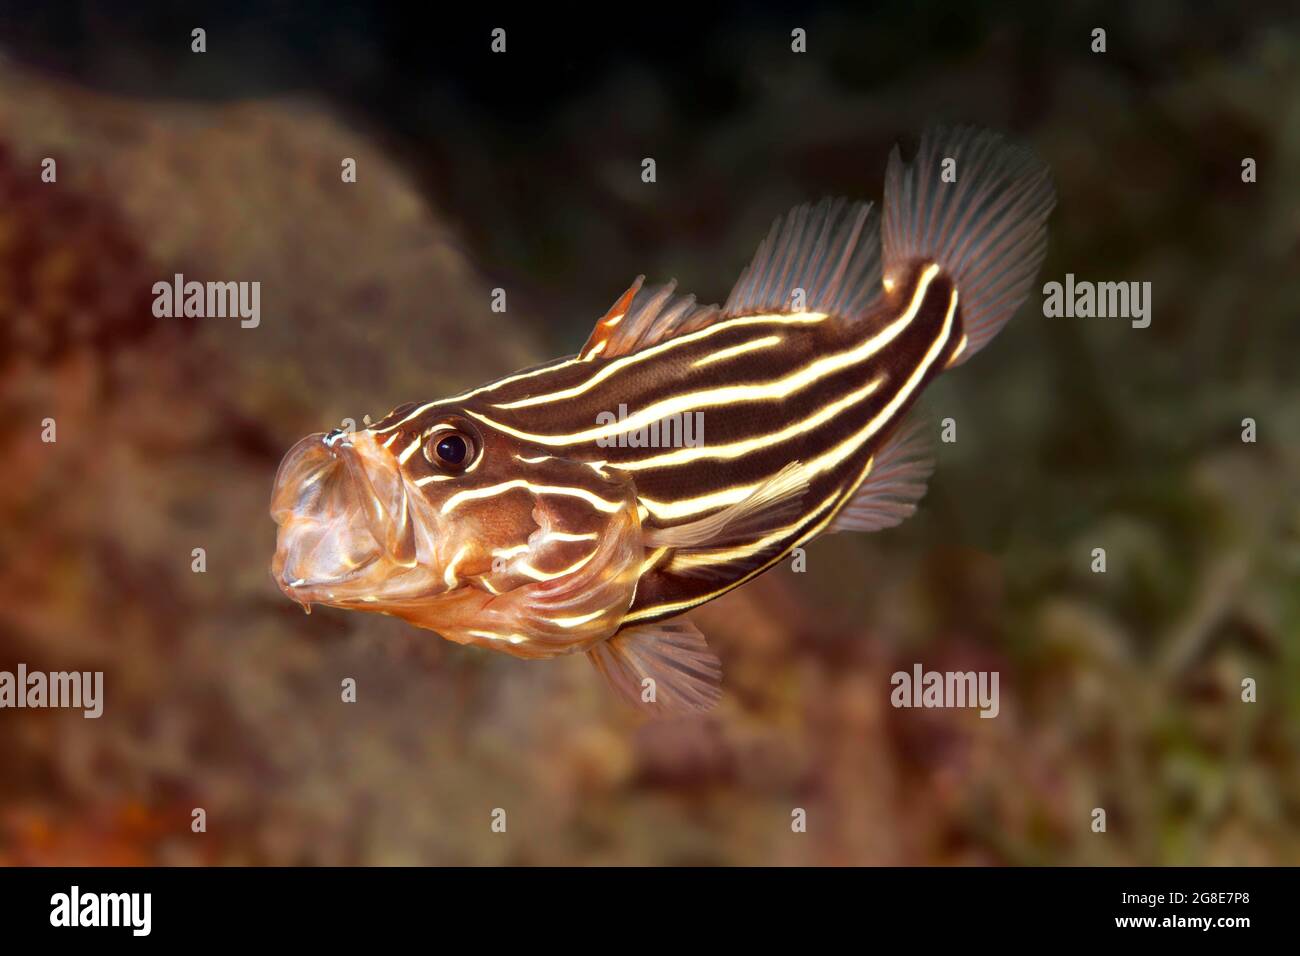 Six-lined soapfish (Grammistes sexlineatus) with open mouth, Red Sea, Fury Shoals, Egypt Stock Photo